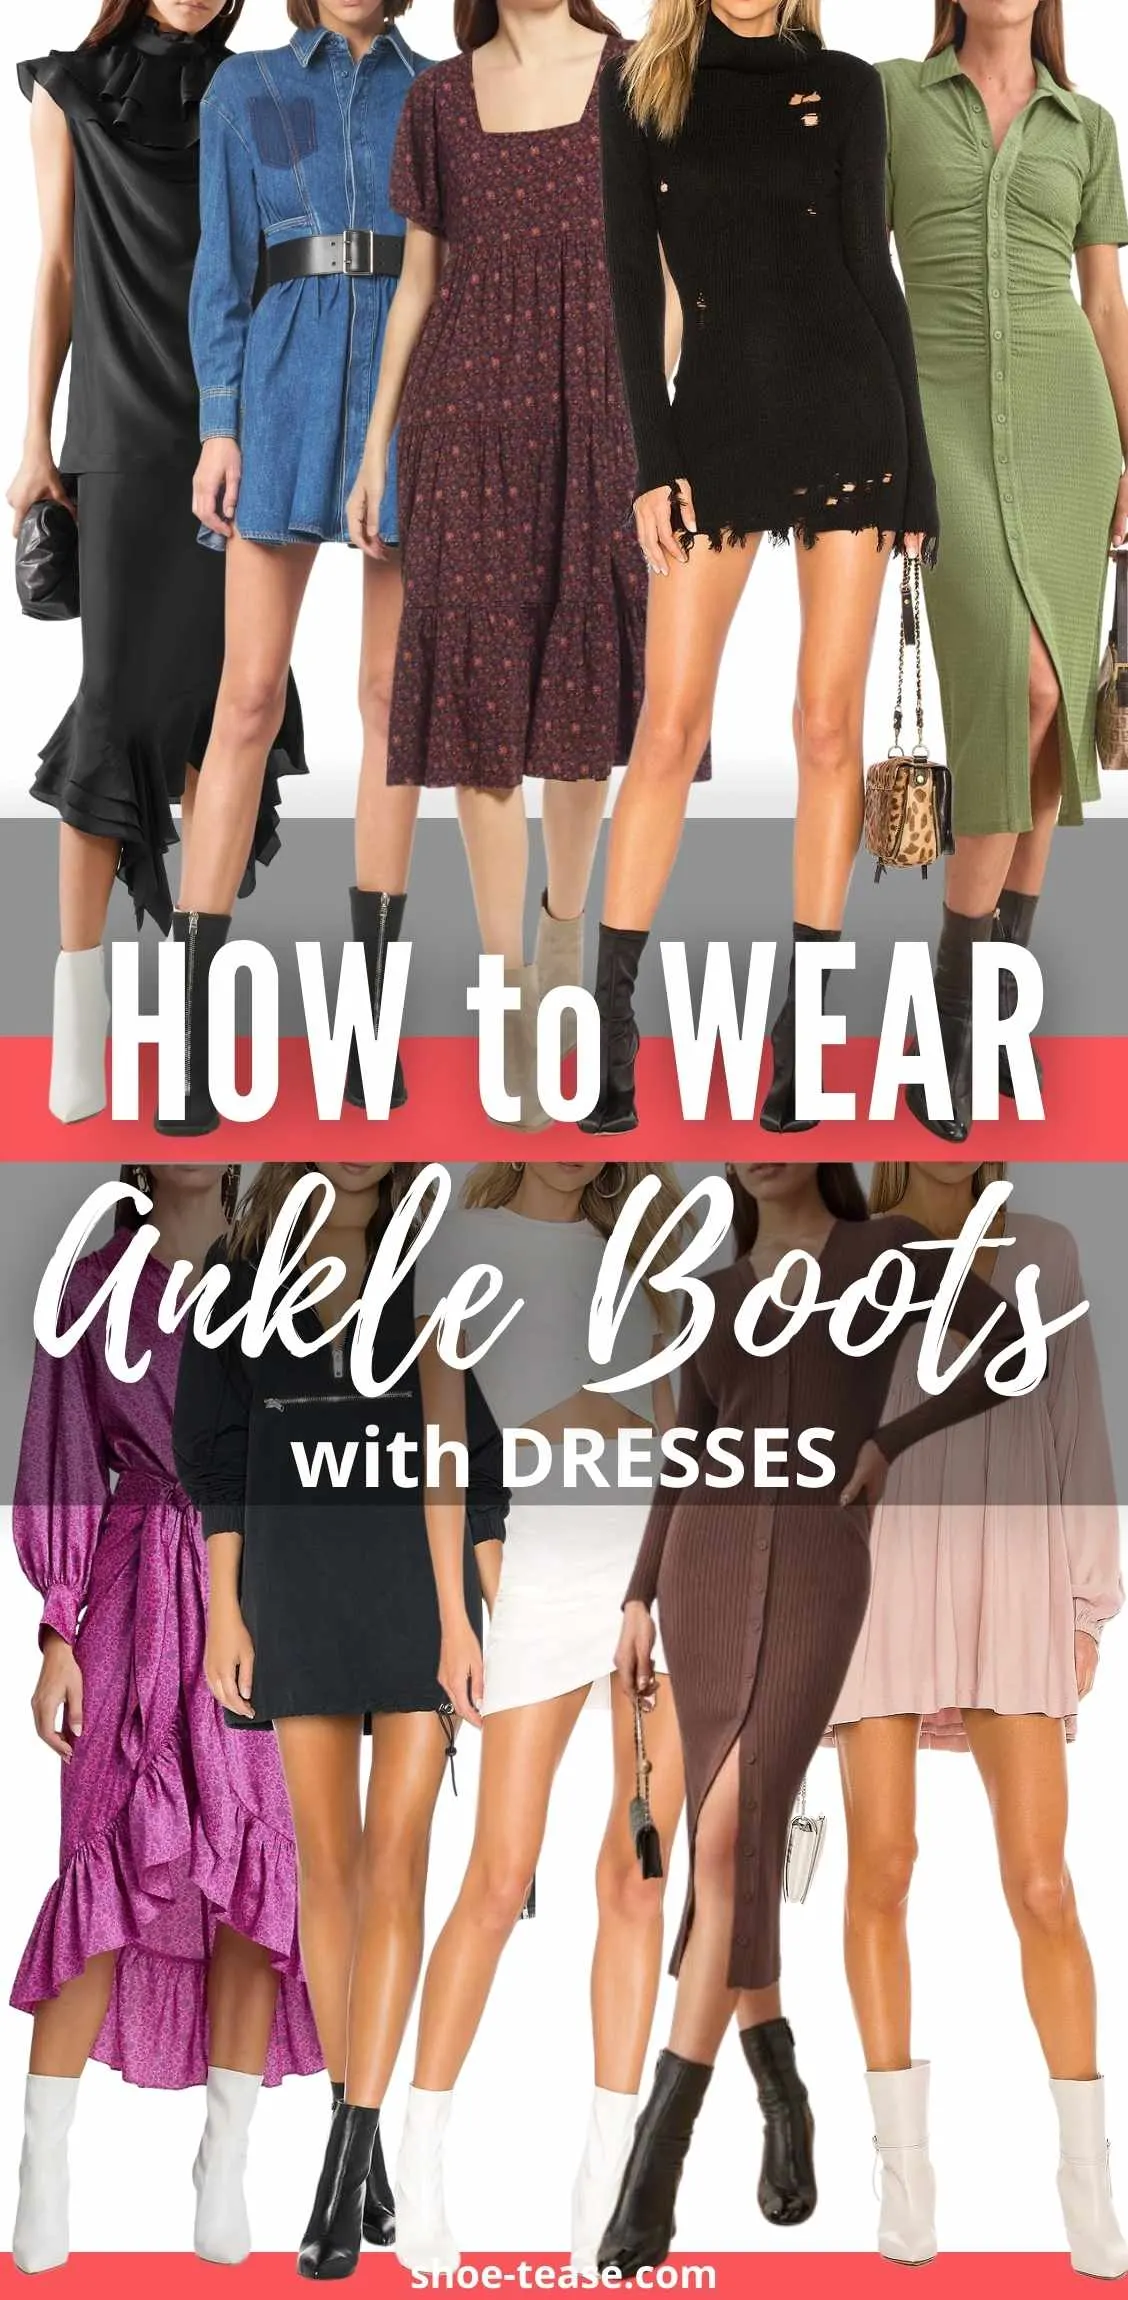 Collage of 10 women wearing different dresses with ankle boots under text reading how to wear ankle boots with dresses.